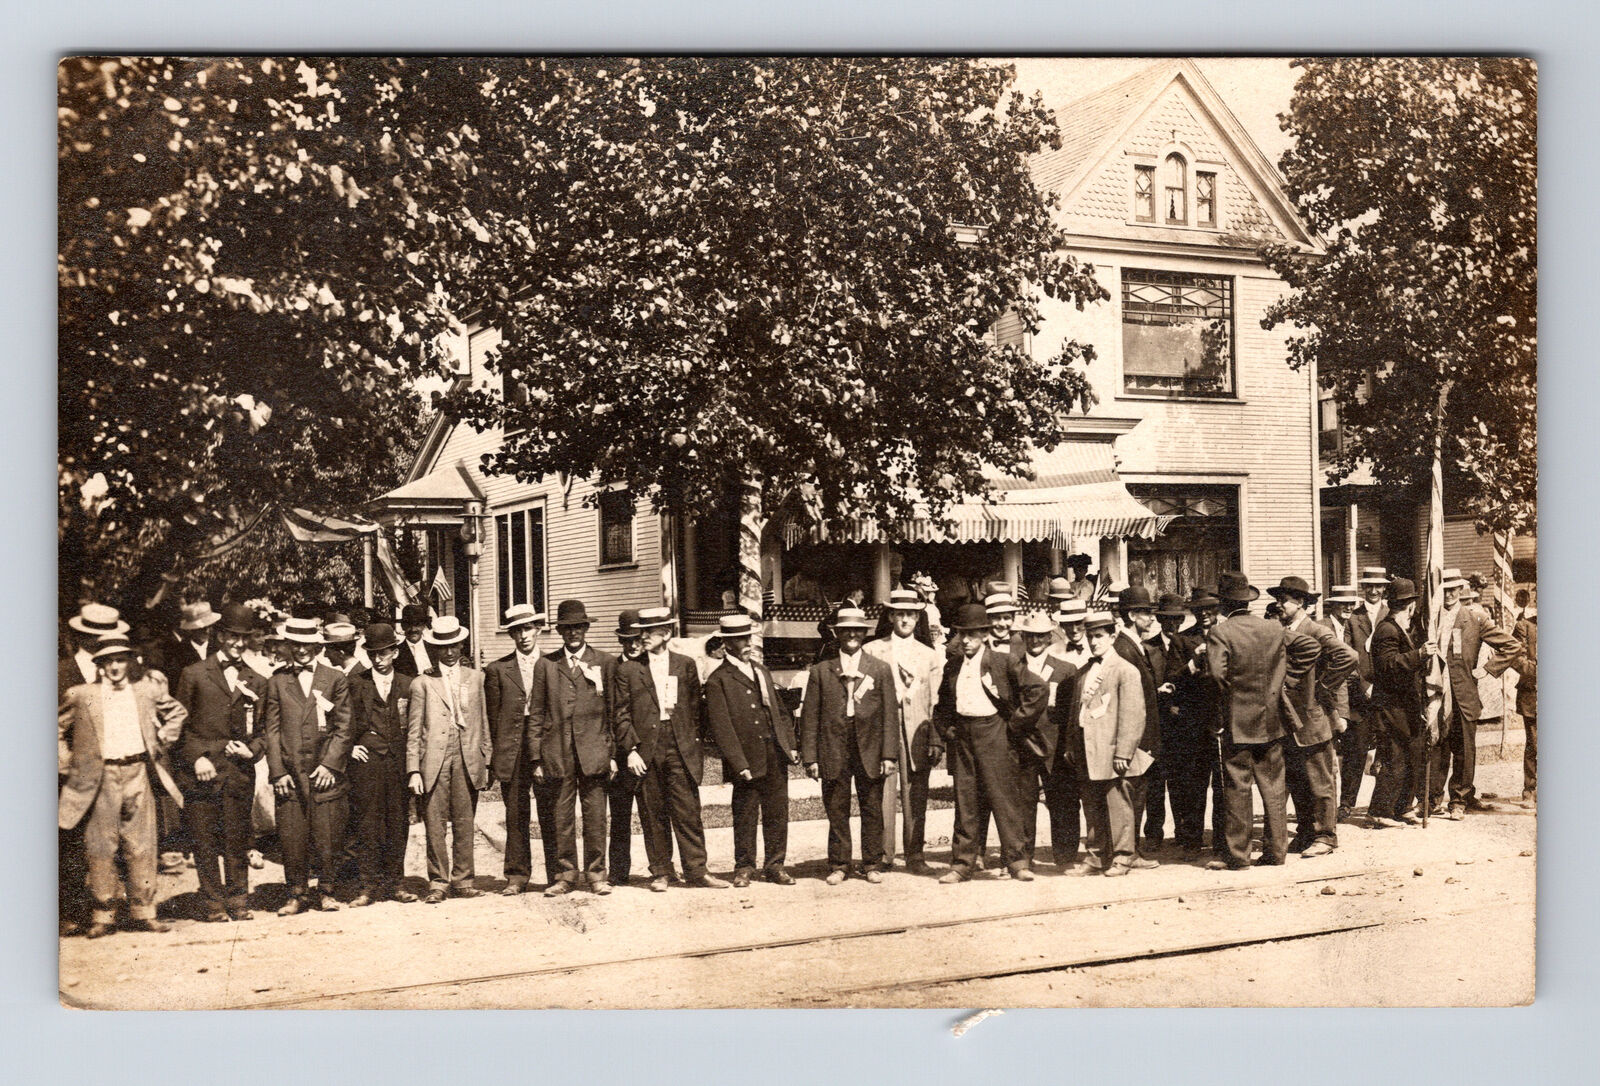 RPPC Large Group of Men in Suits Hats Gather Along Street Real Photo Postcard